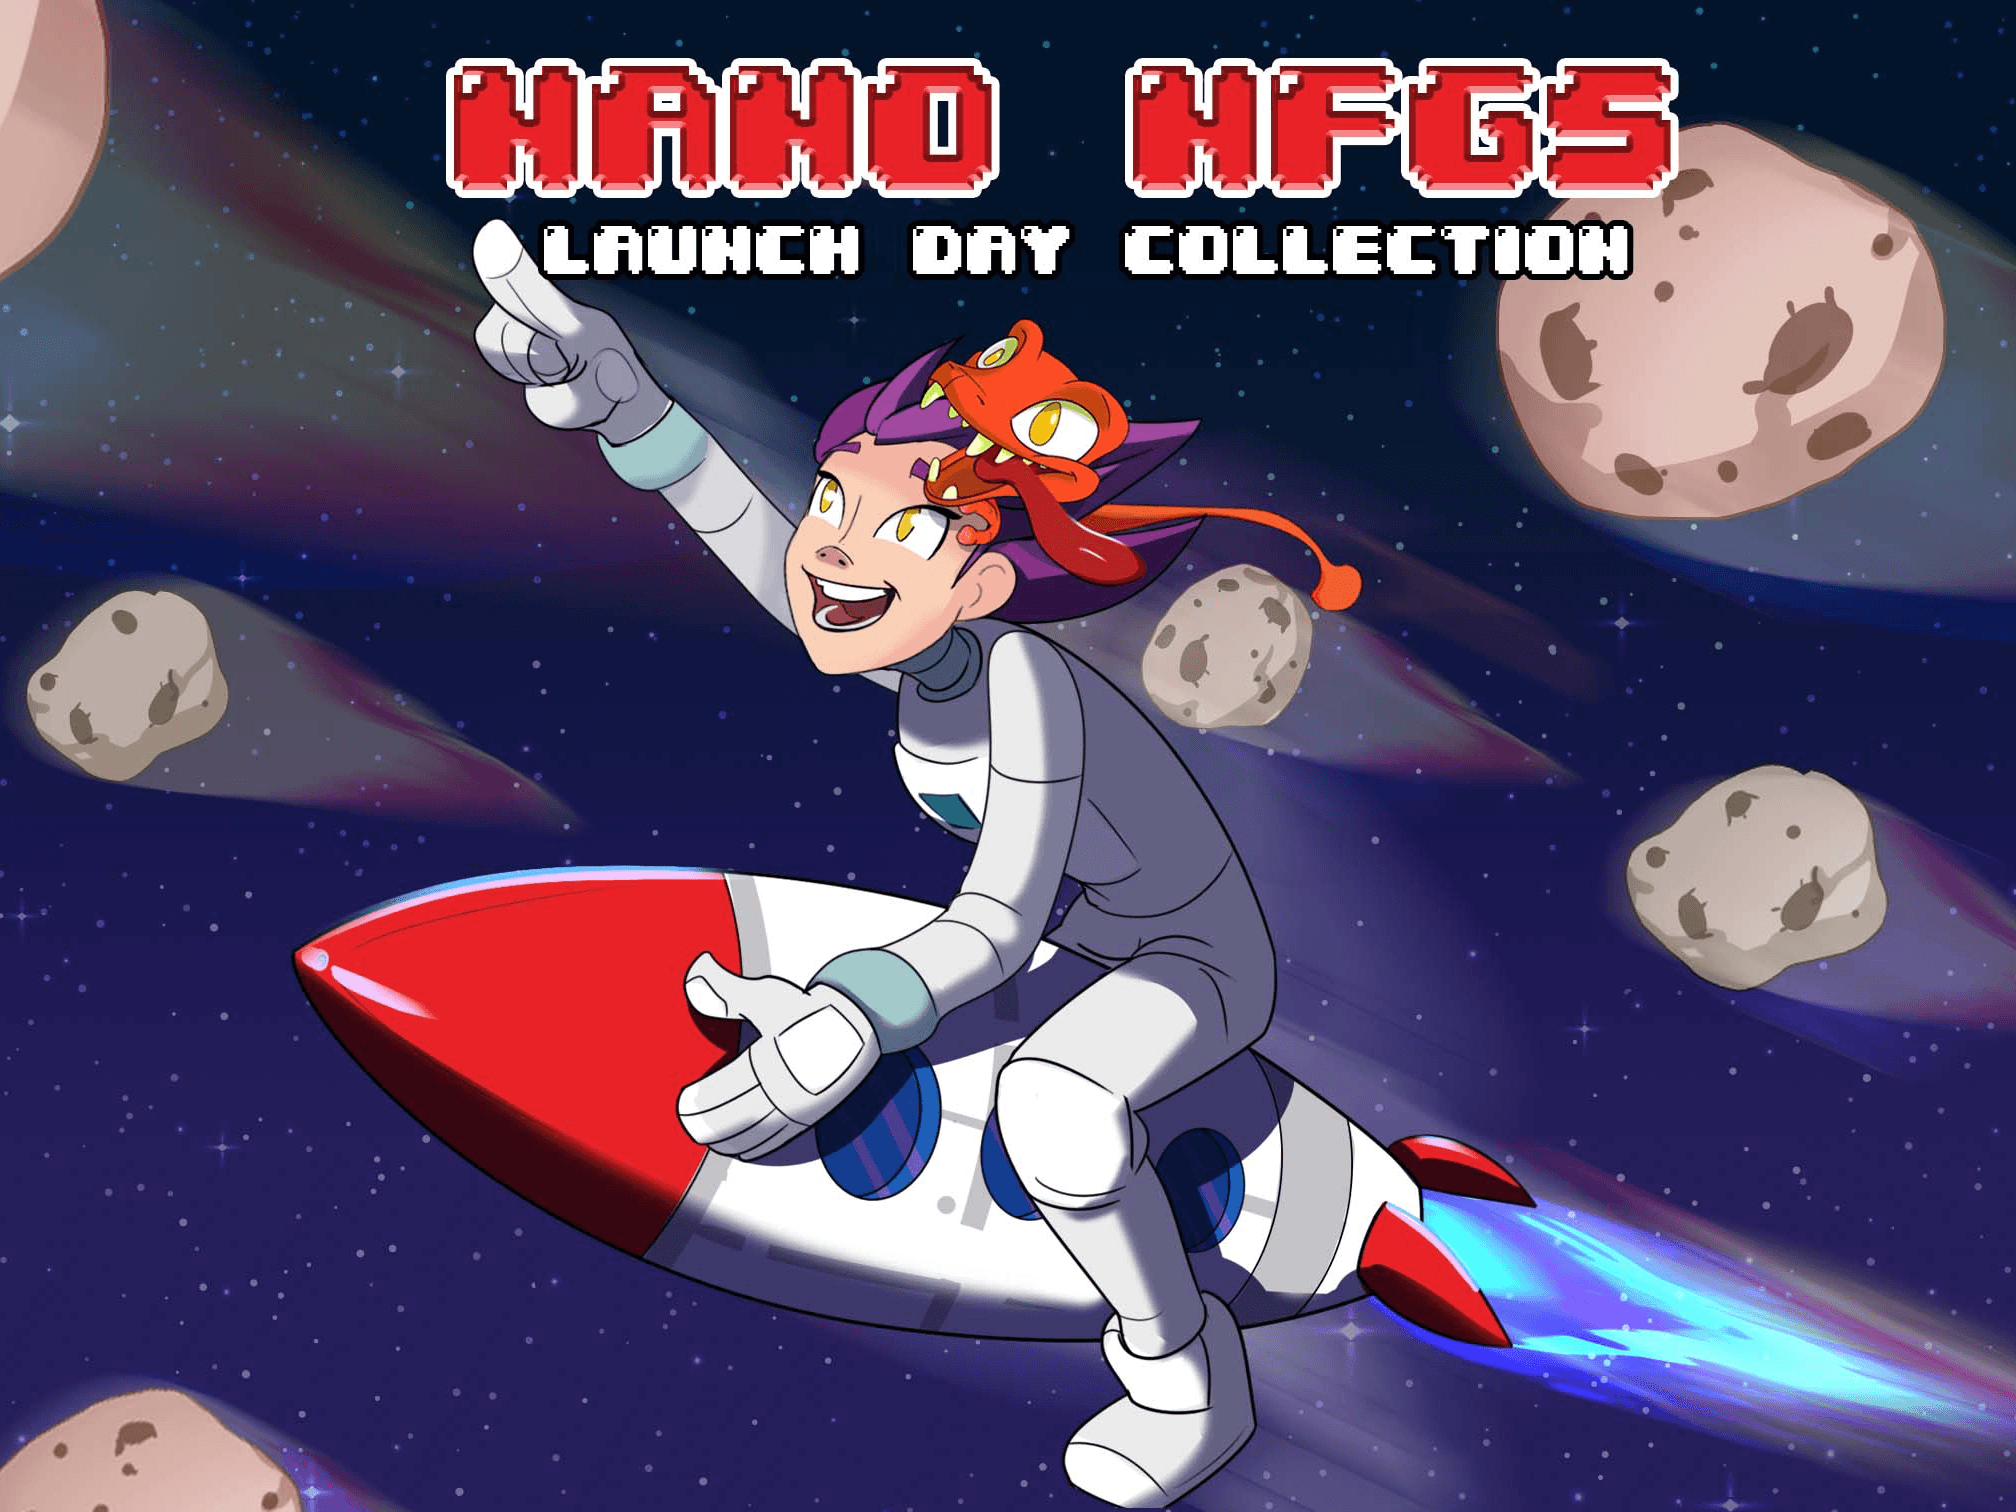 NanoNFGs: Launch Day Collection